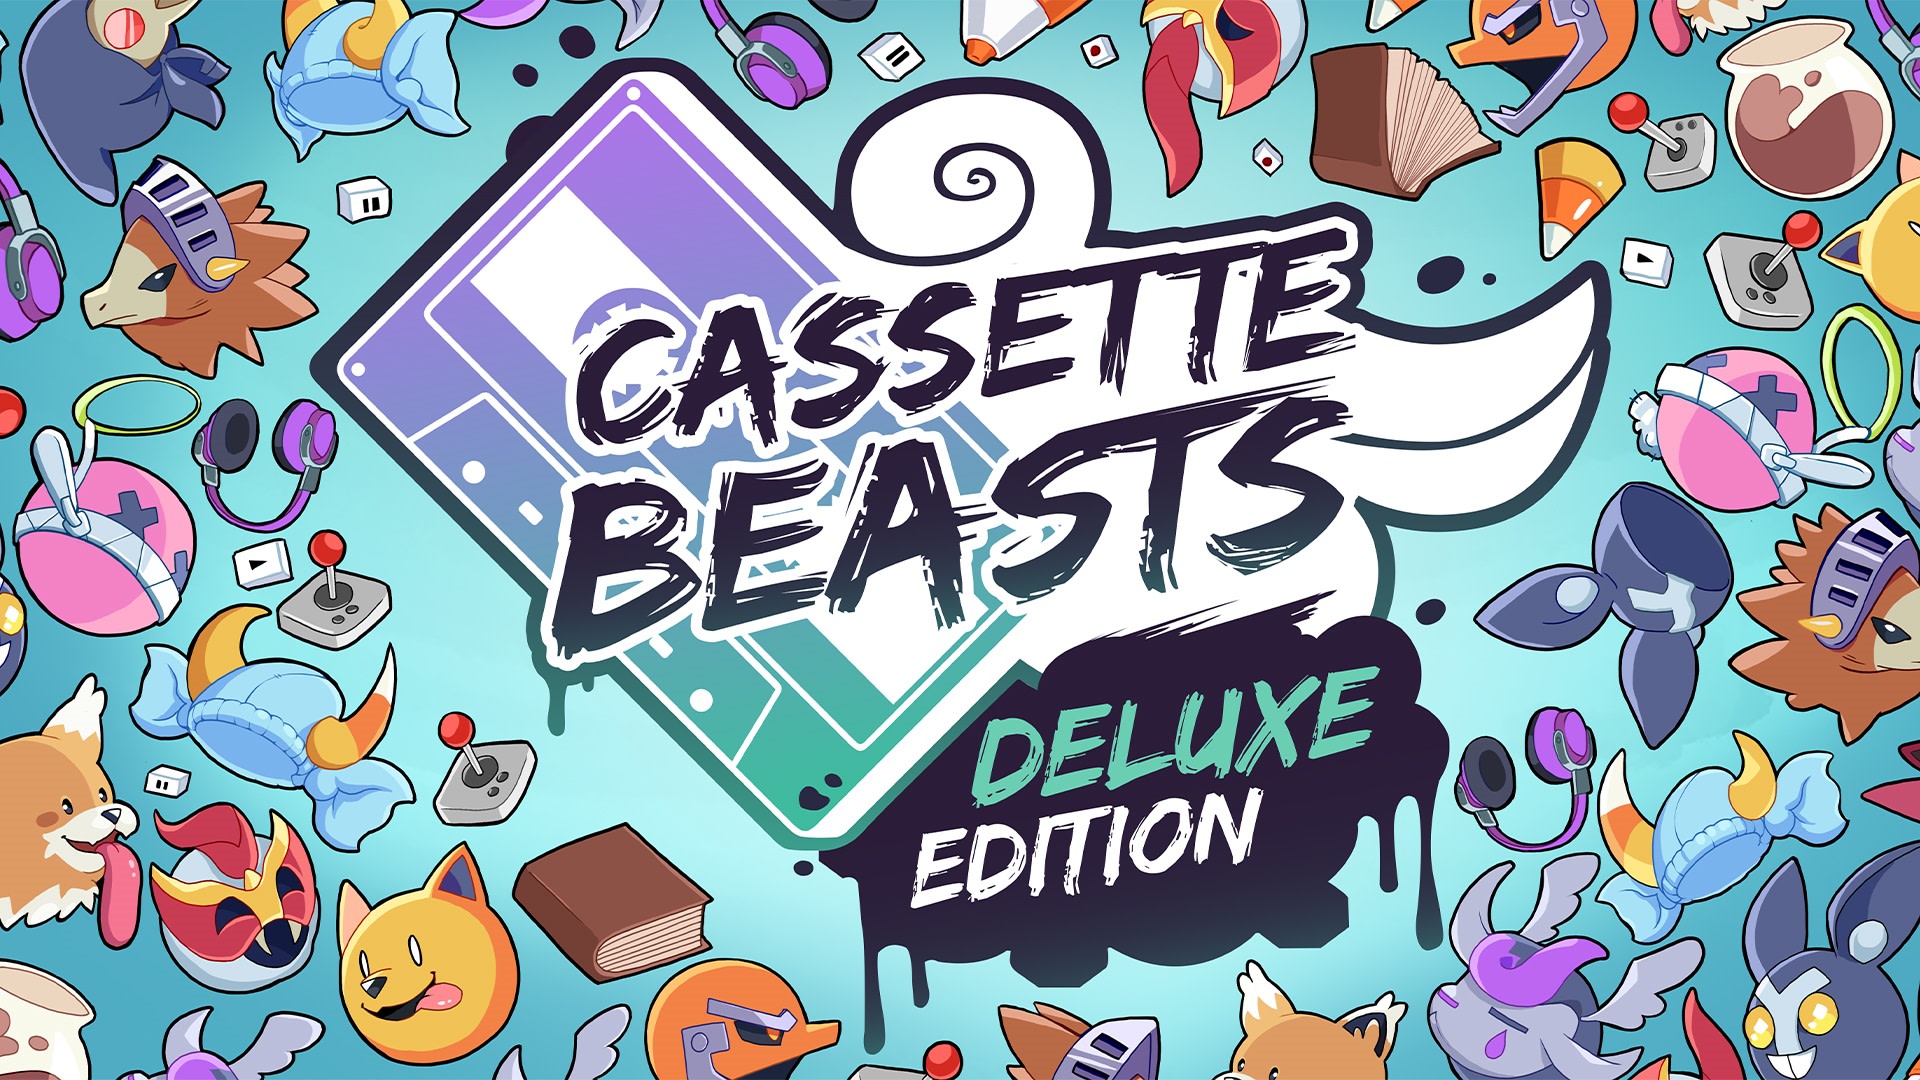 Cassette Beasts Deluxe Edition 1